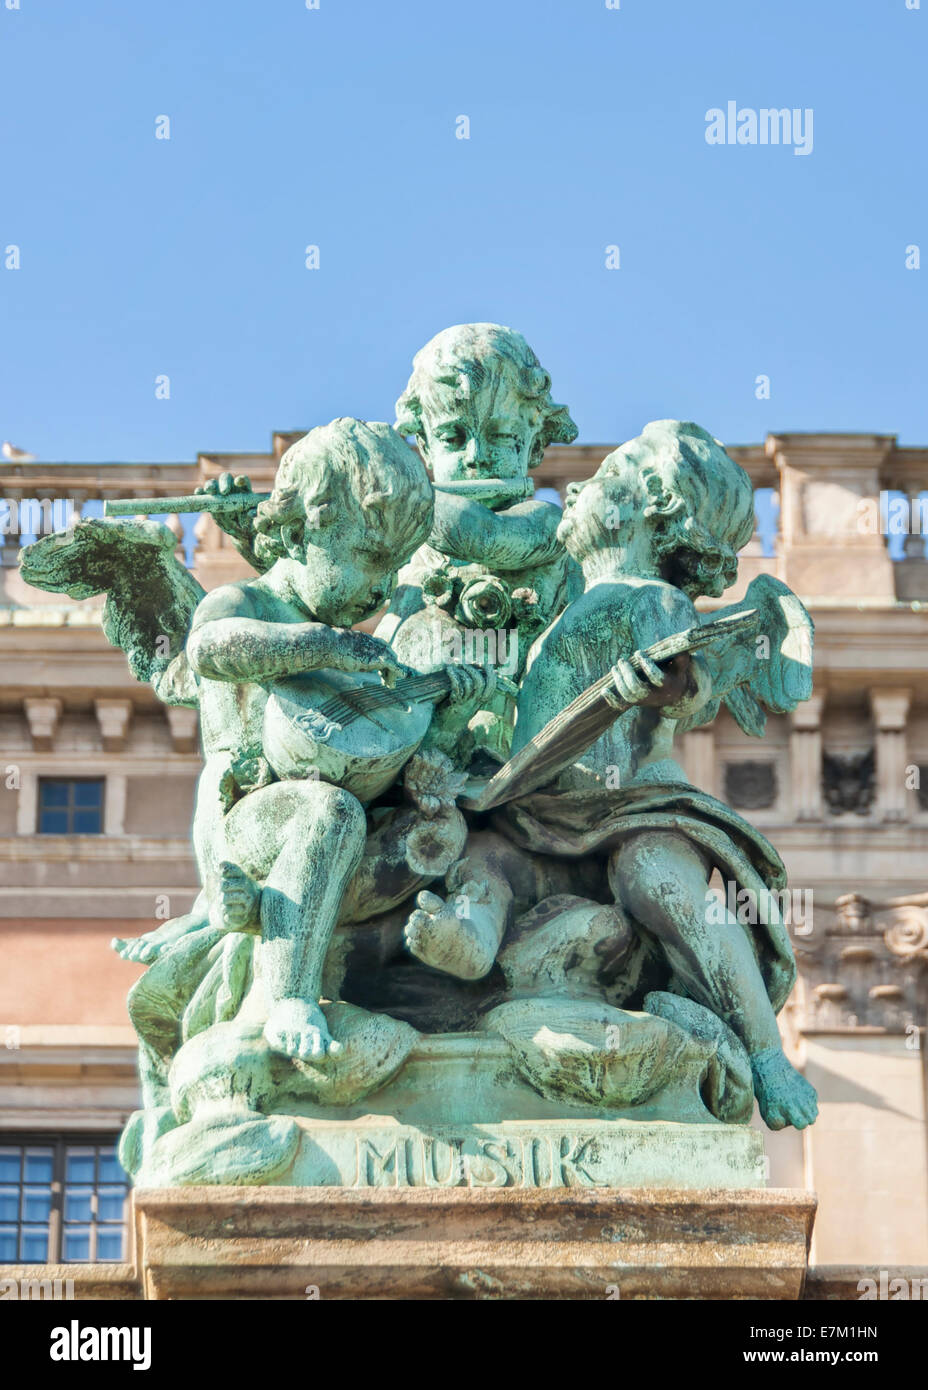 Statue to celebrate Music at the fence in front of the royal palace in Stockholm. Stock Photo